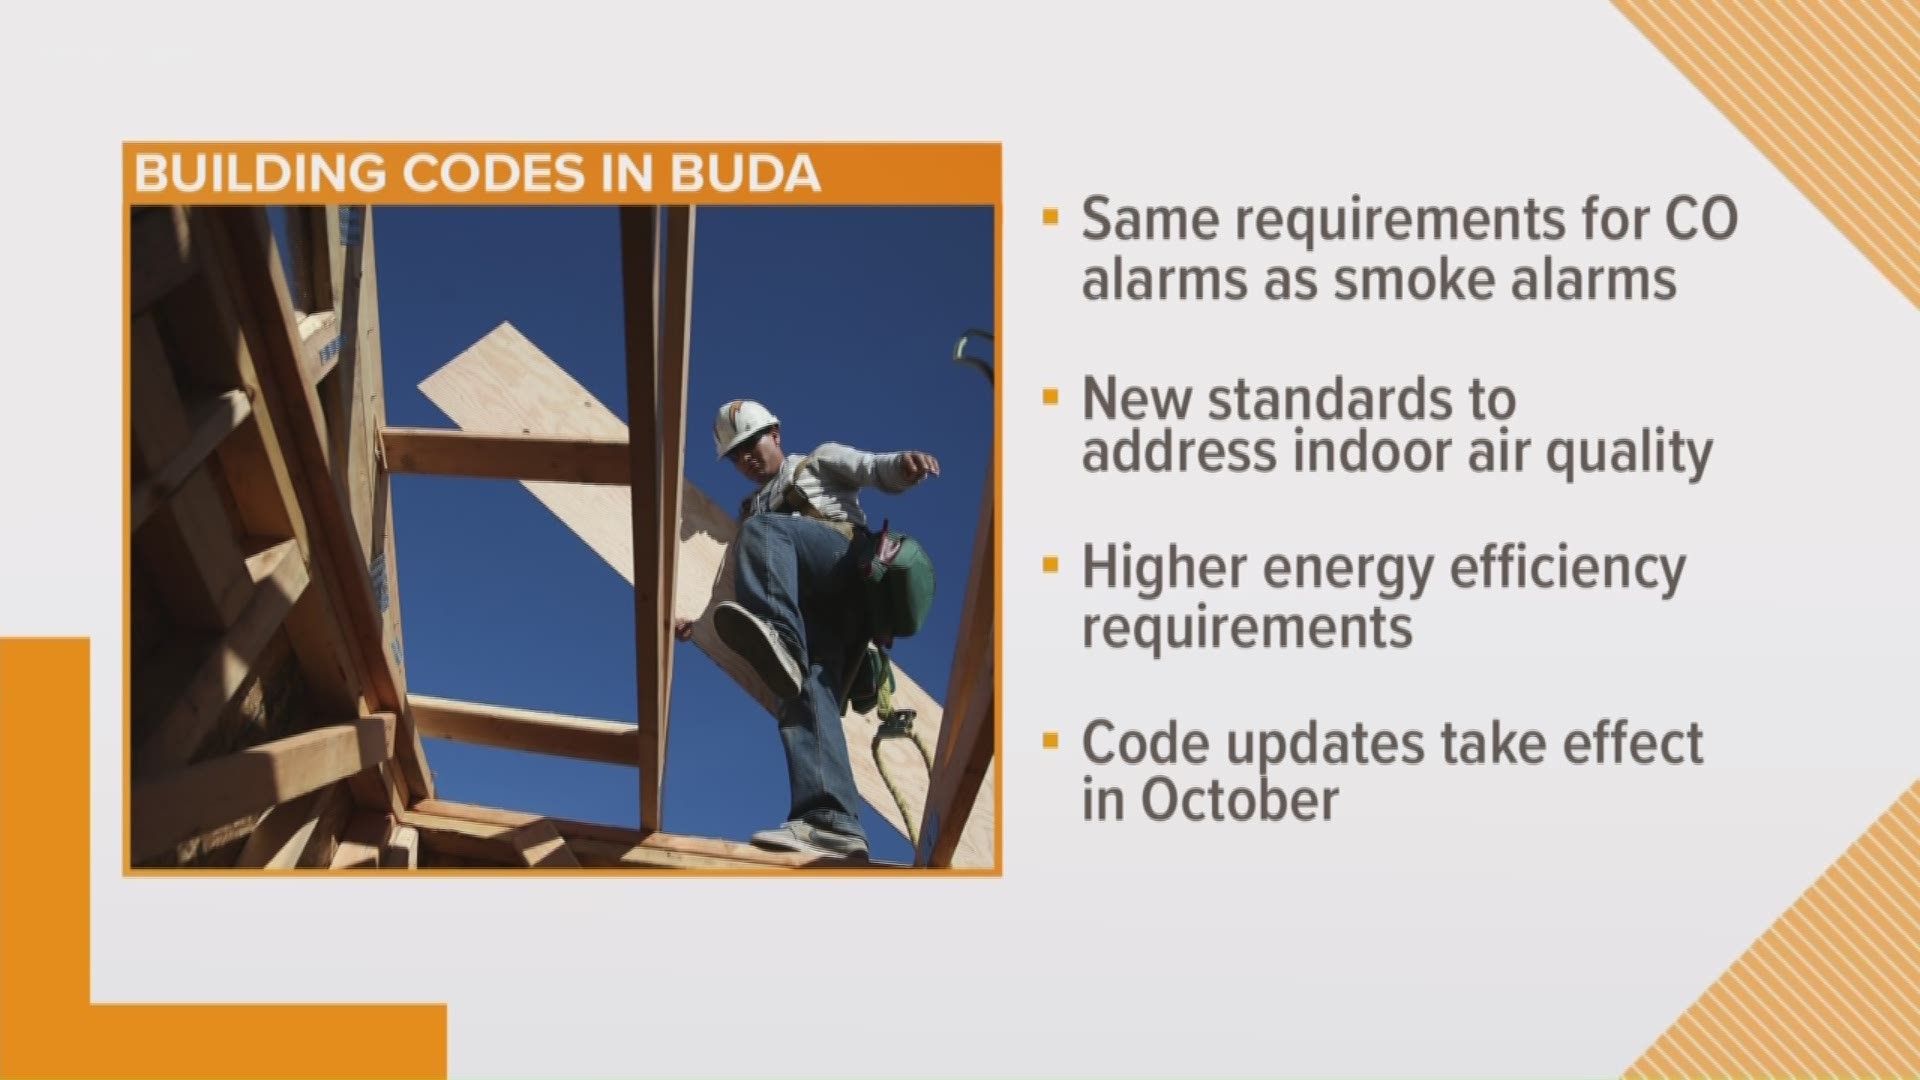 Buda revamps code to increase safety